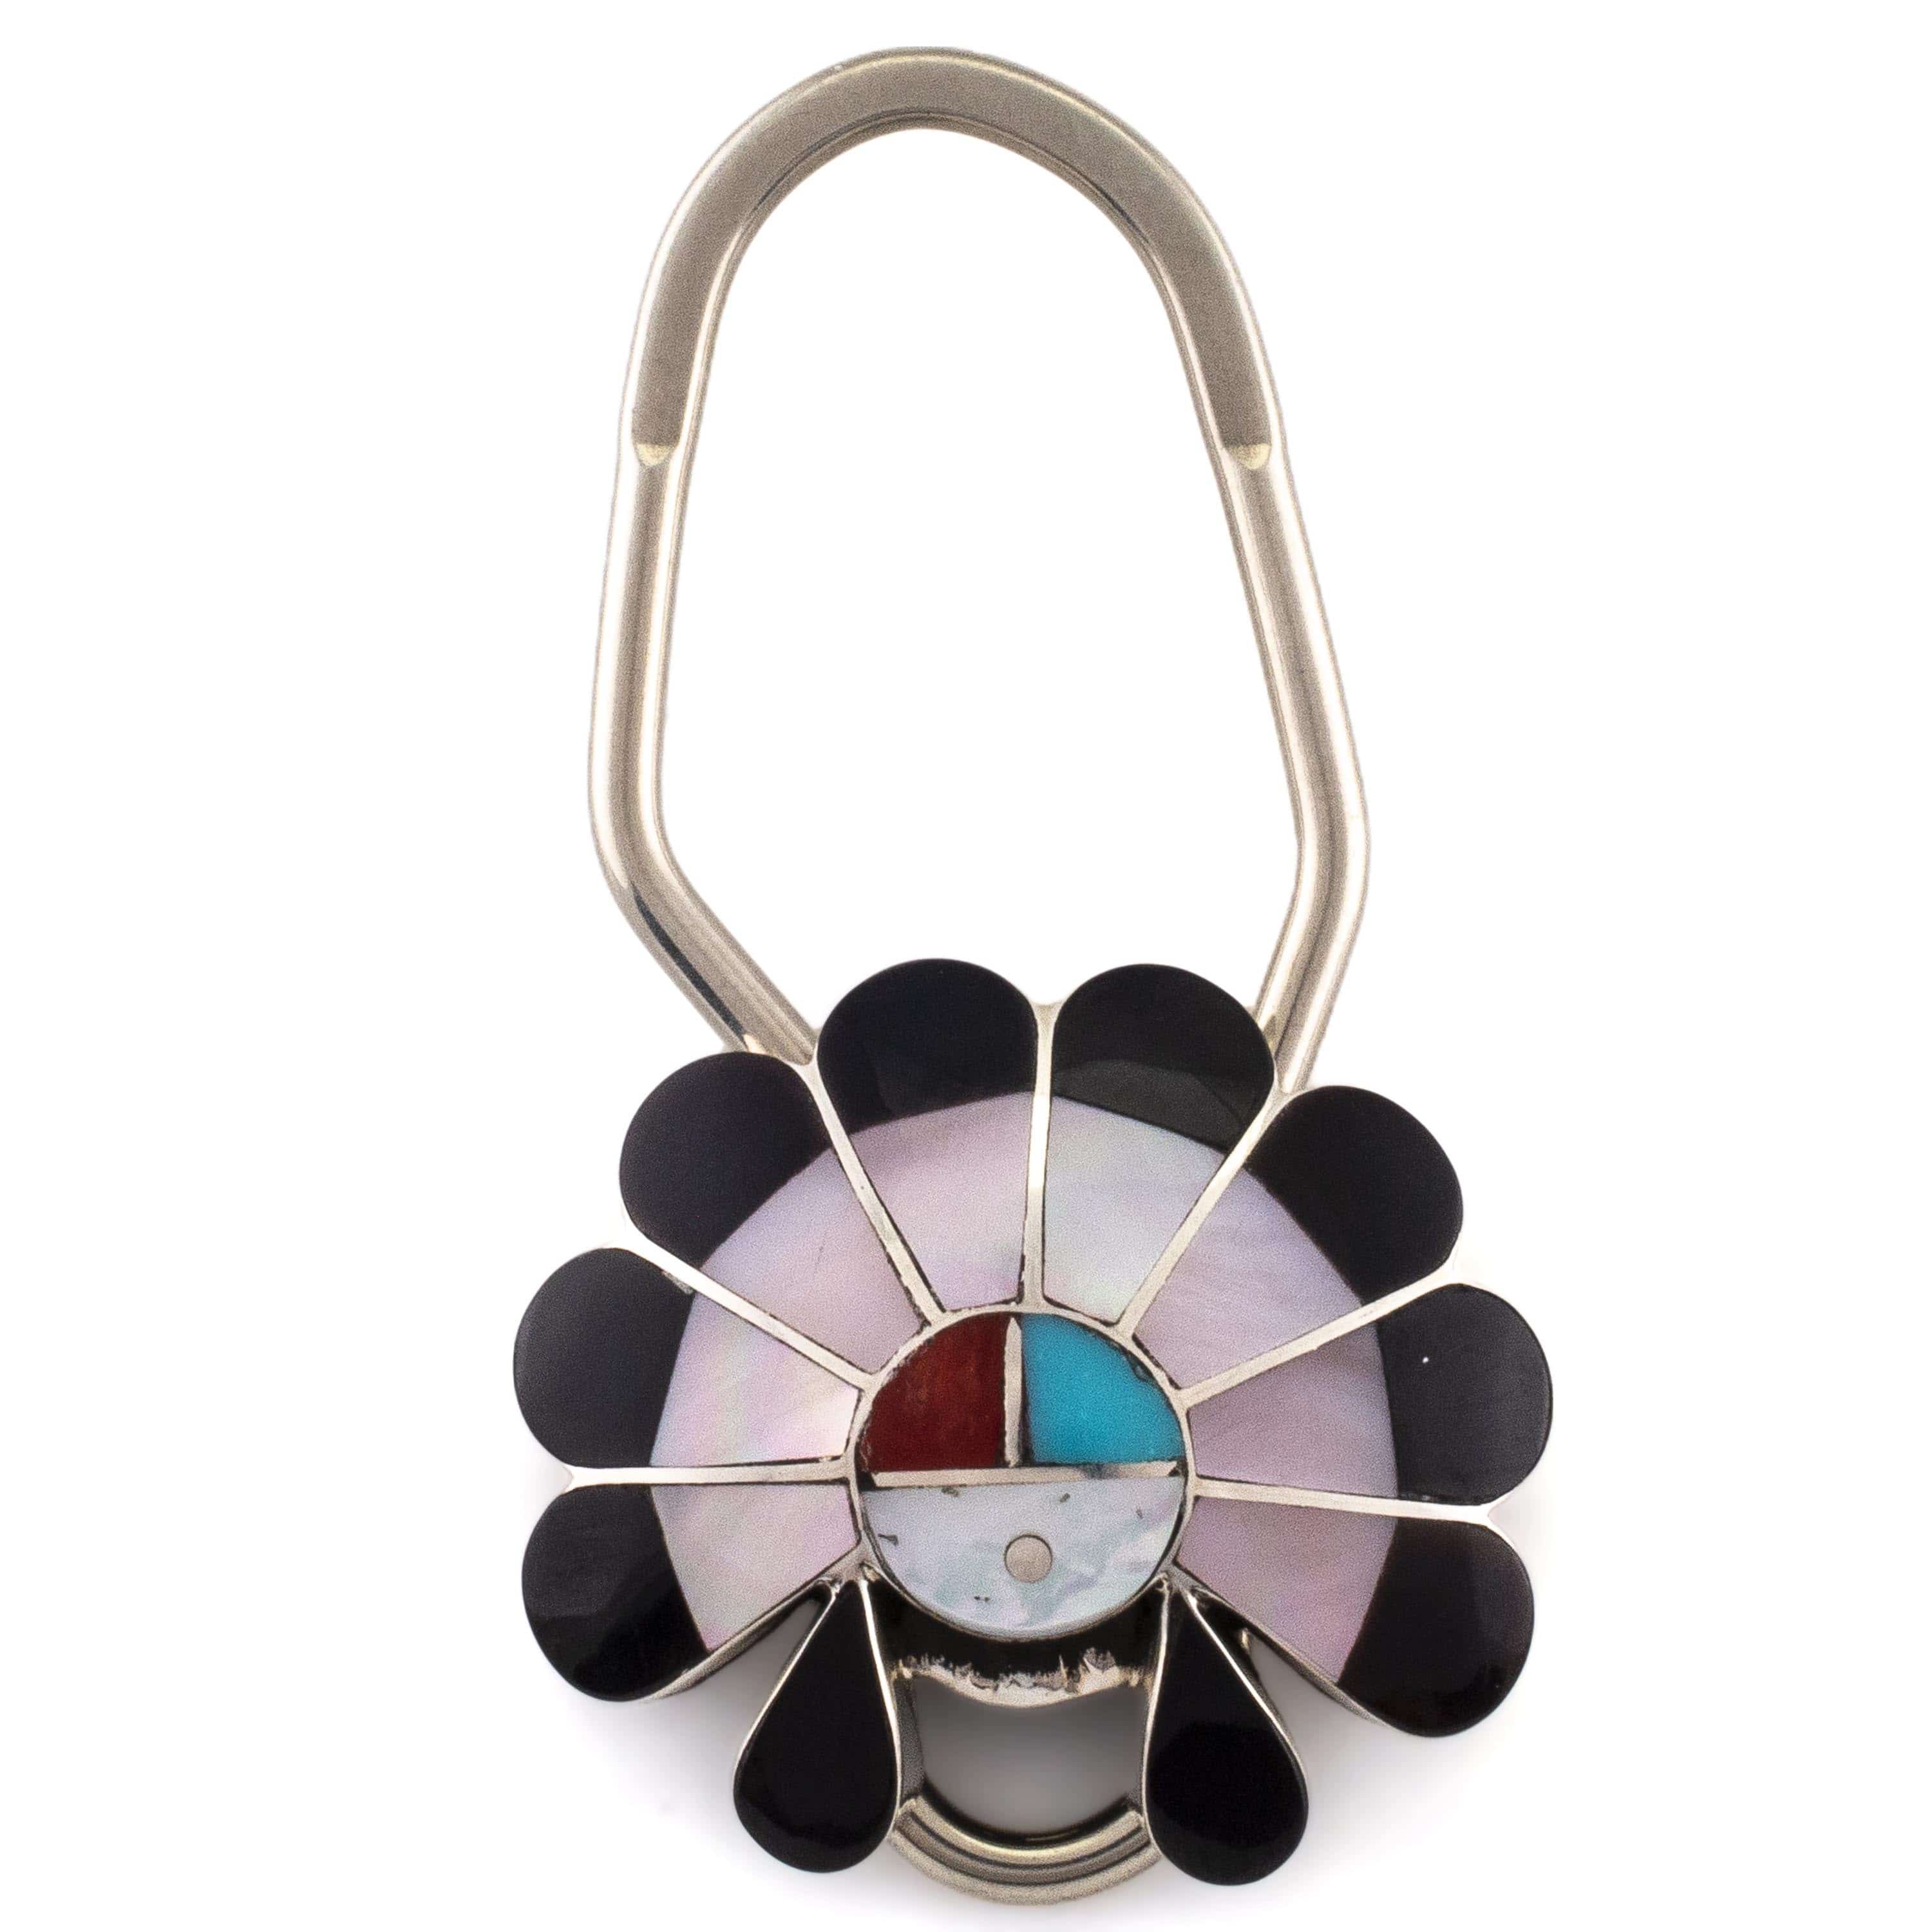 Kalifano Native American Jewelry Denise Siutza Zuni Sunface Pink Mother of Pearl and Black Onyx with Coral, Turquoise, and Mother of Pearl Accents USA Native American Made 925 Sterling Silver Keychain NAK200.001